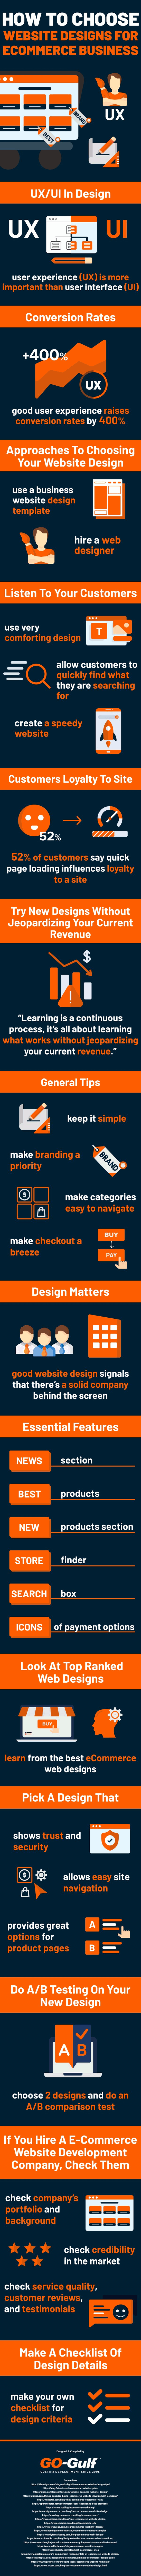 How to choose website designs for ecommerce business [Infographic]